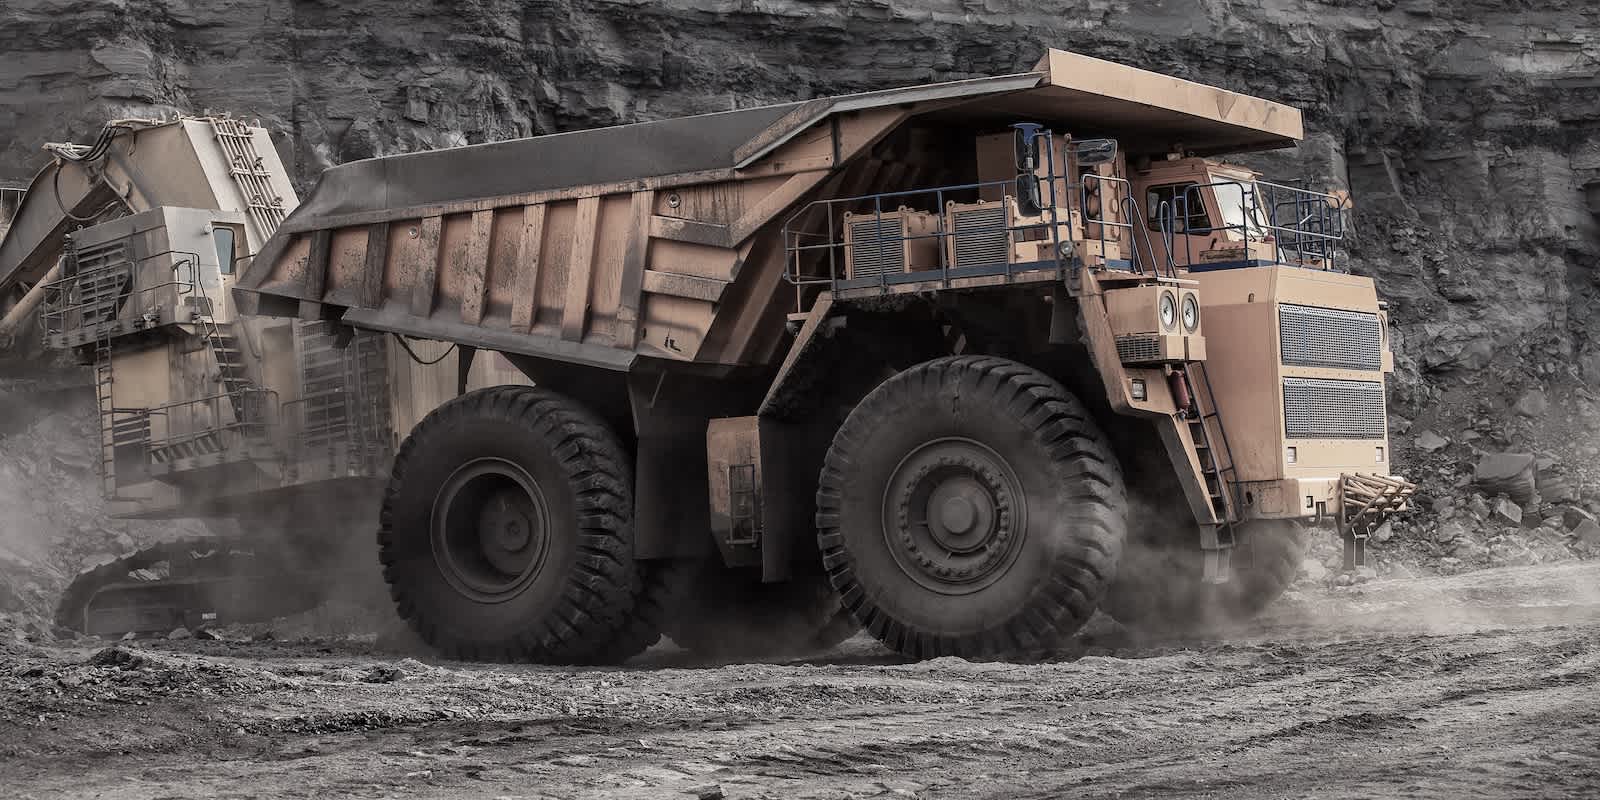 Mining dump truck, one of the products potentially subject to new U.S. sanctions on exports to Russia.